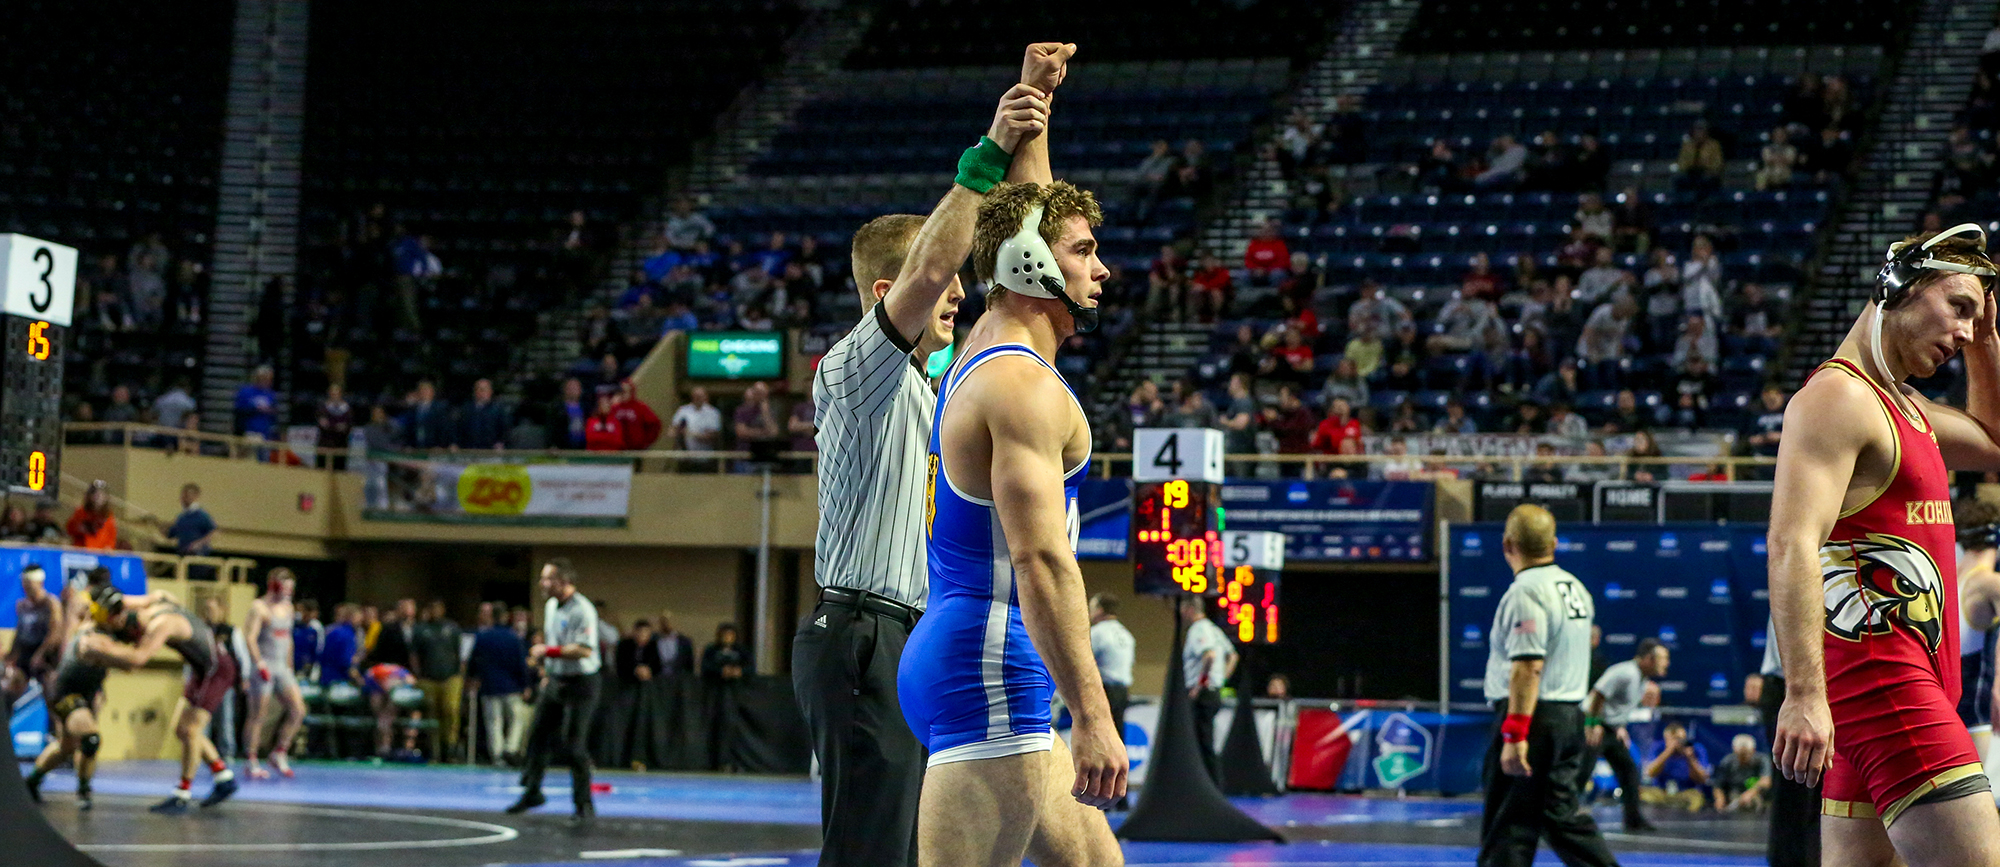 Junior John Boyle secured his second consecutive All-America honor with a 2-0 showing during the opening day of the NCAA Championships on Friday. (Photo by Geoff Riccio)